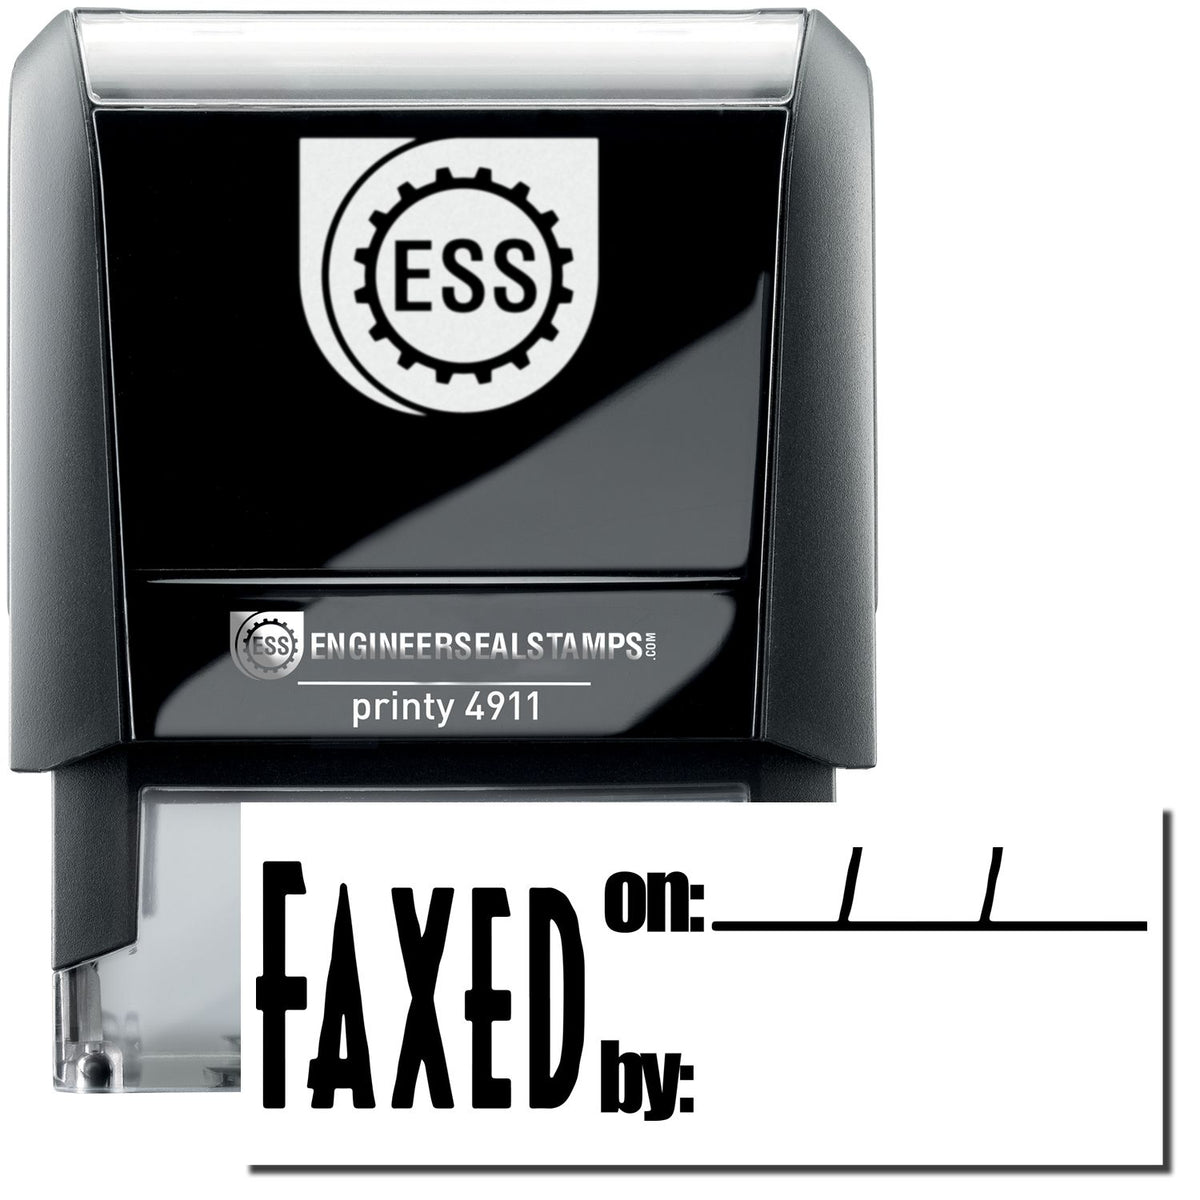 A self-inking stamp with a stamped image showing how the text &quot;FAXED on: by:&quot; (with space for writing the date and the name of the person from whom the fax is received is given) is displayed after stamping.